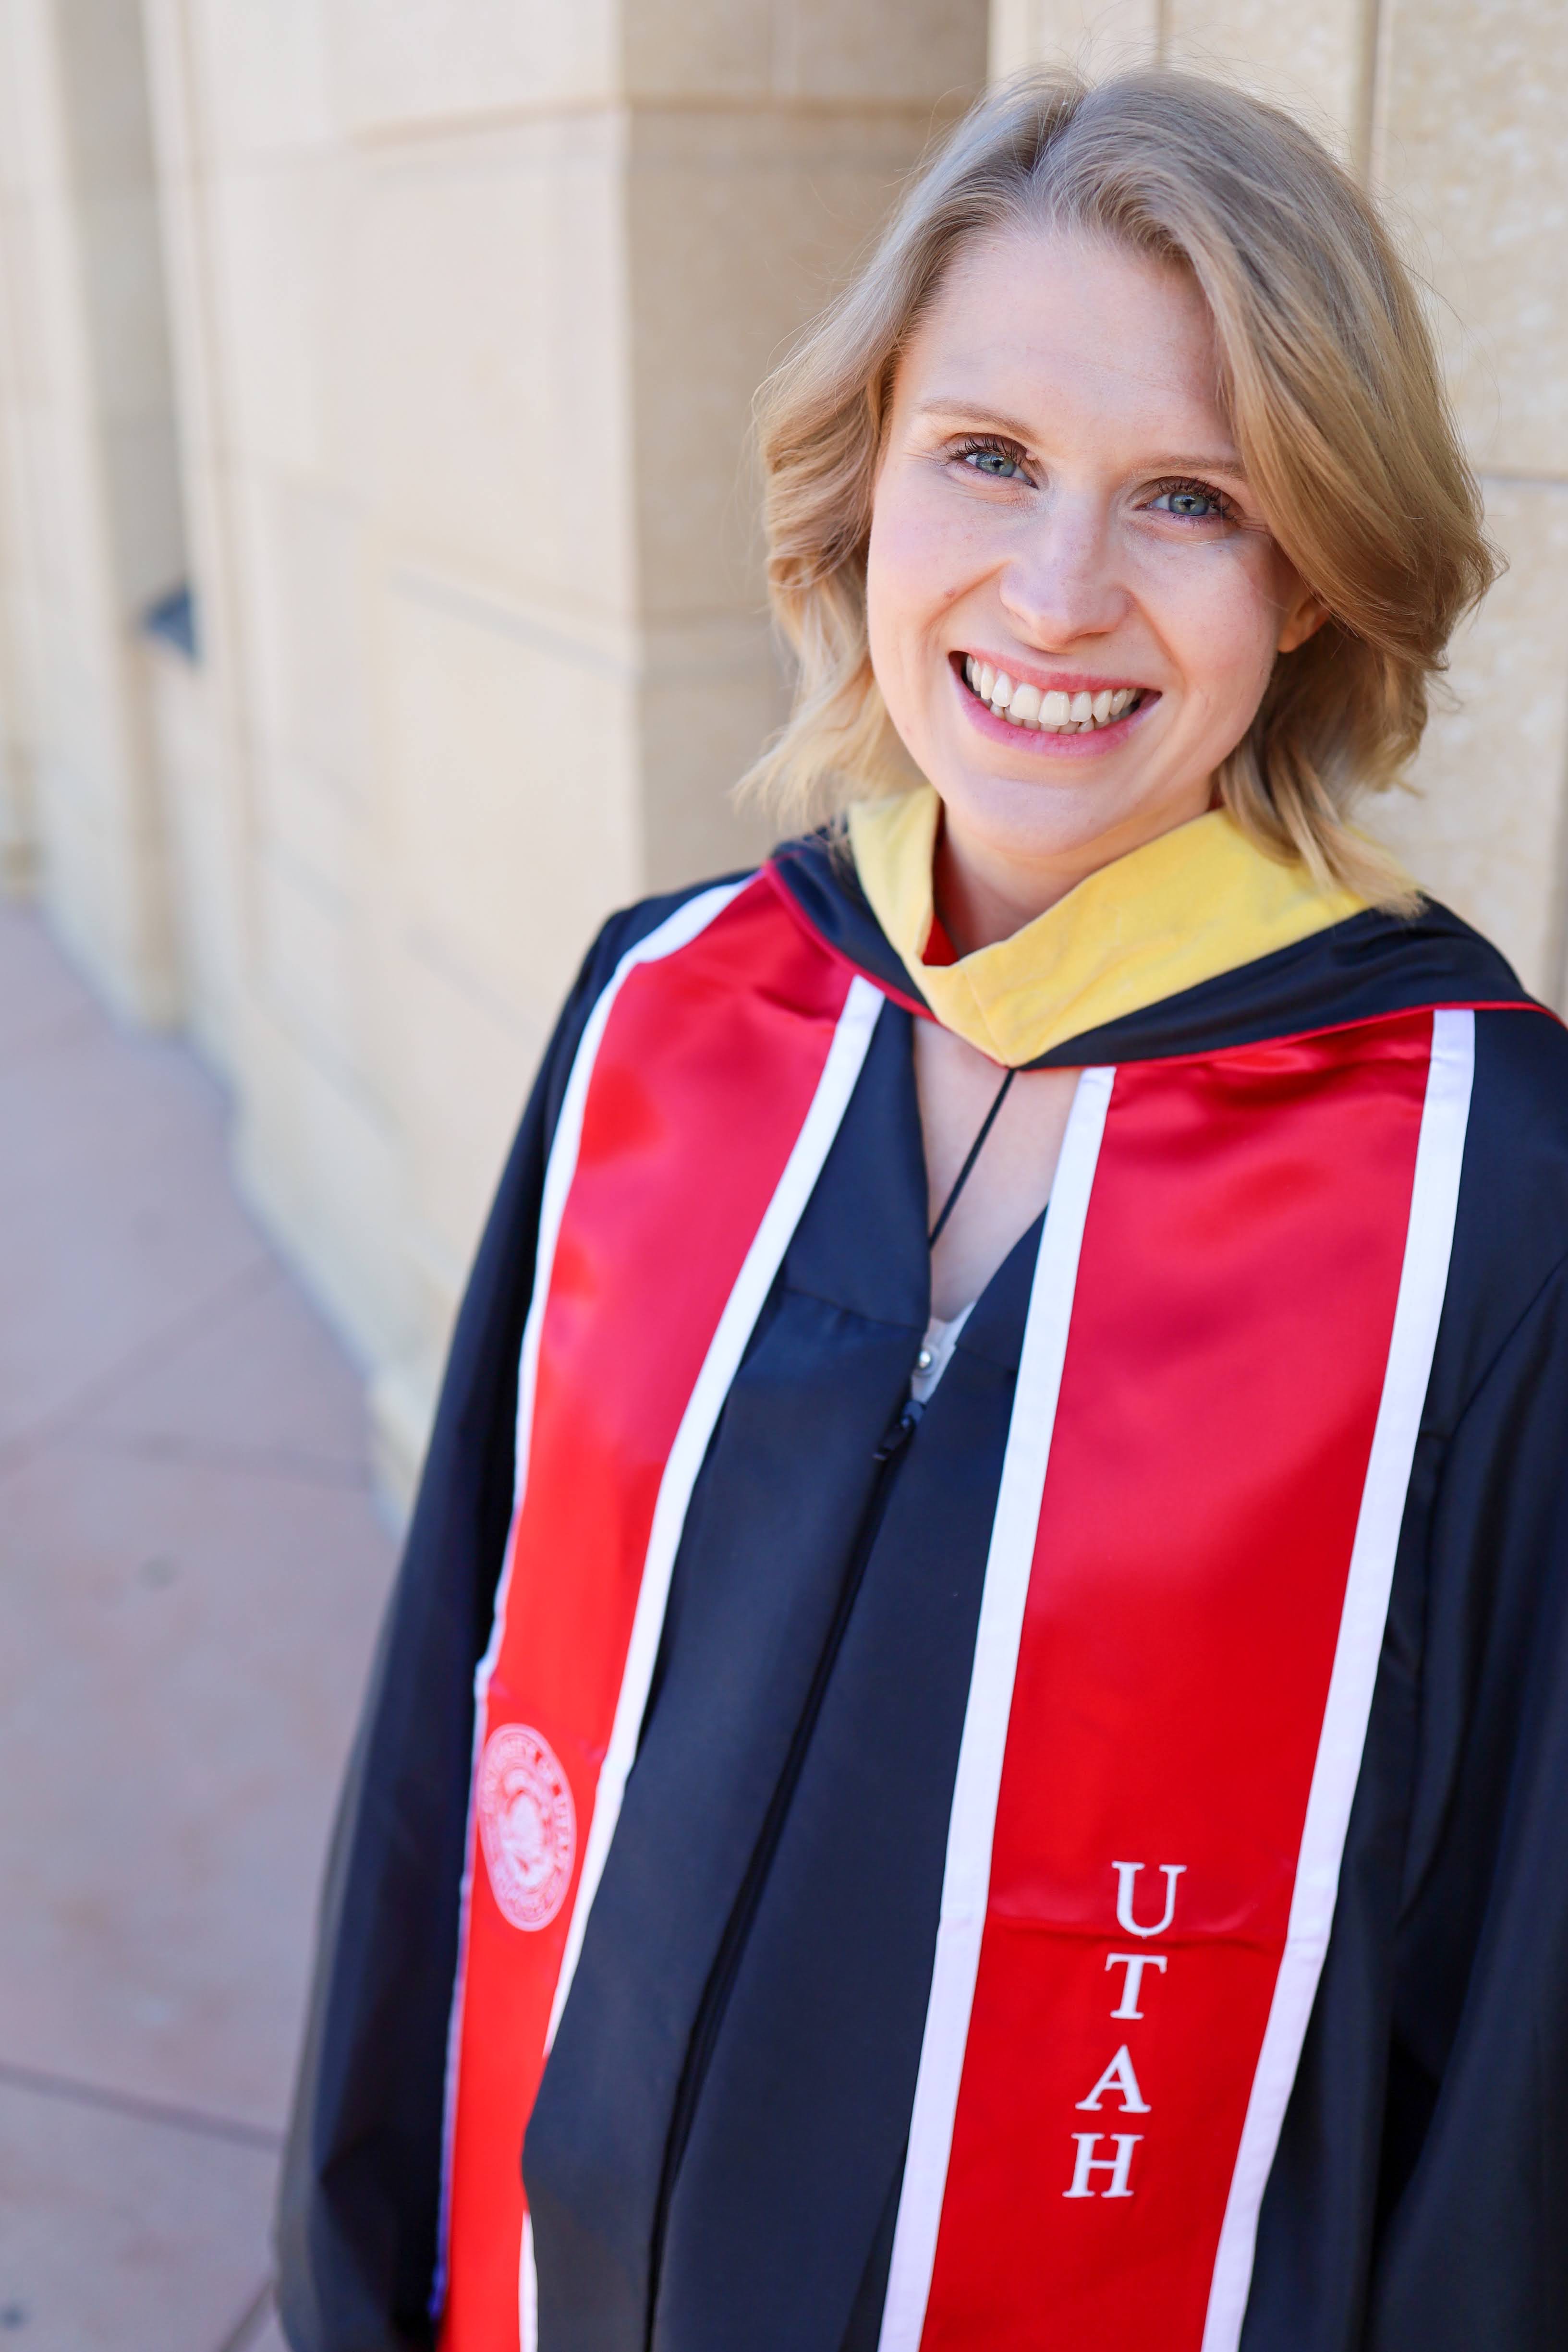 A headshot photo of a smiling young woman in graduation regalia outside.